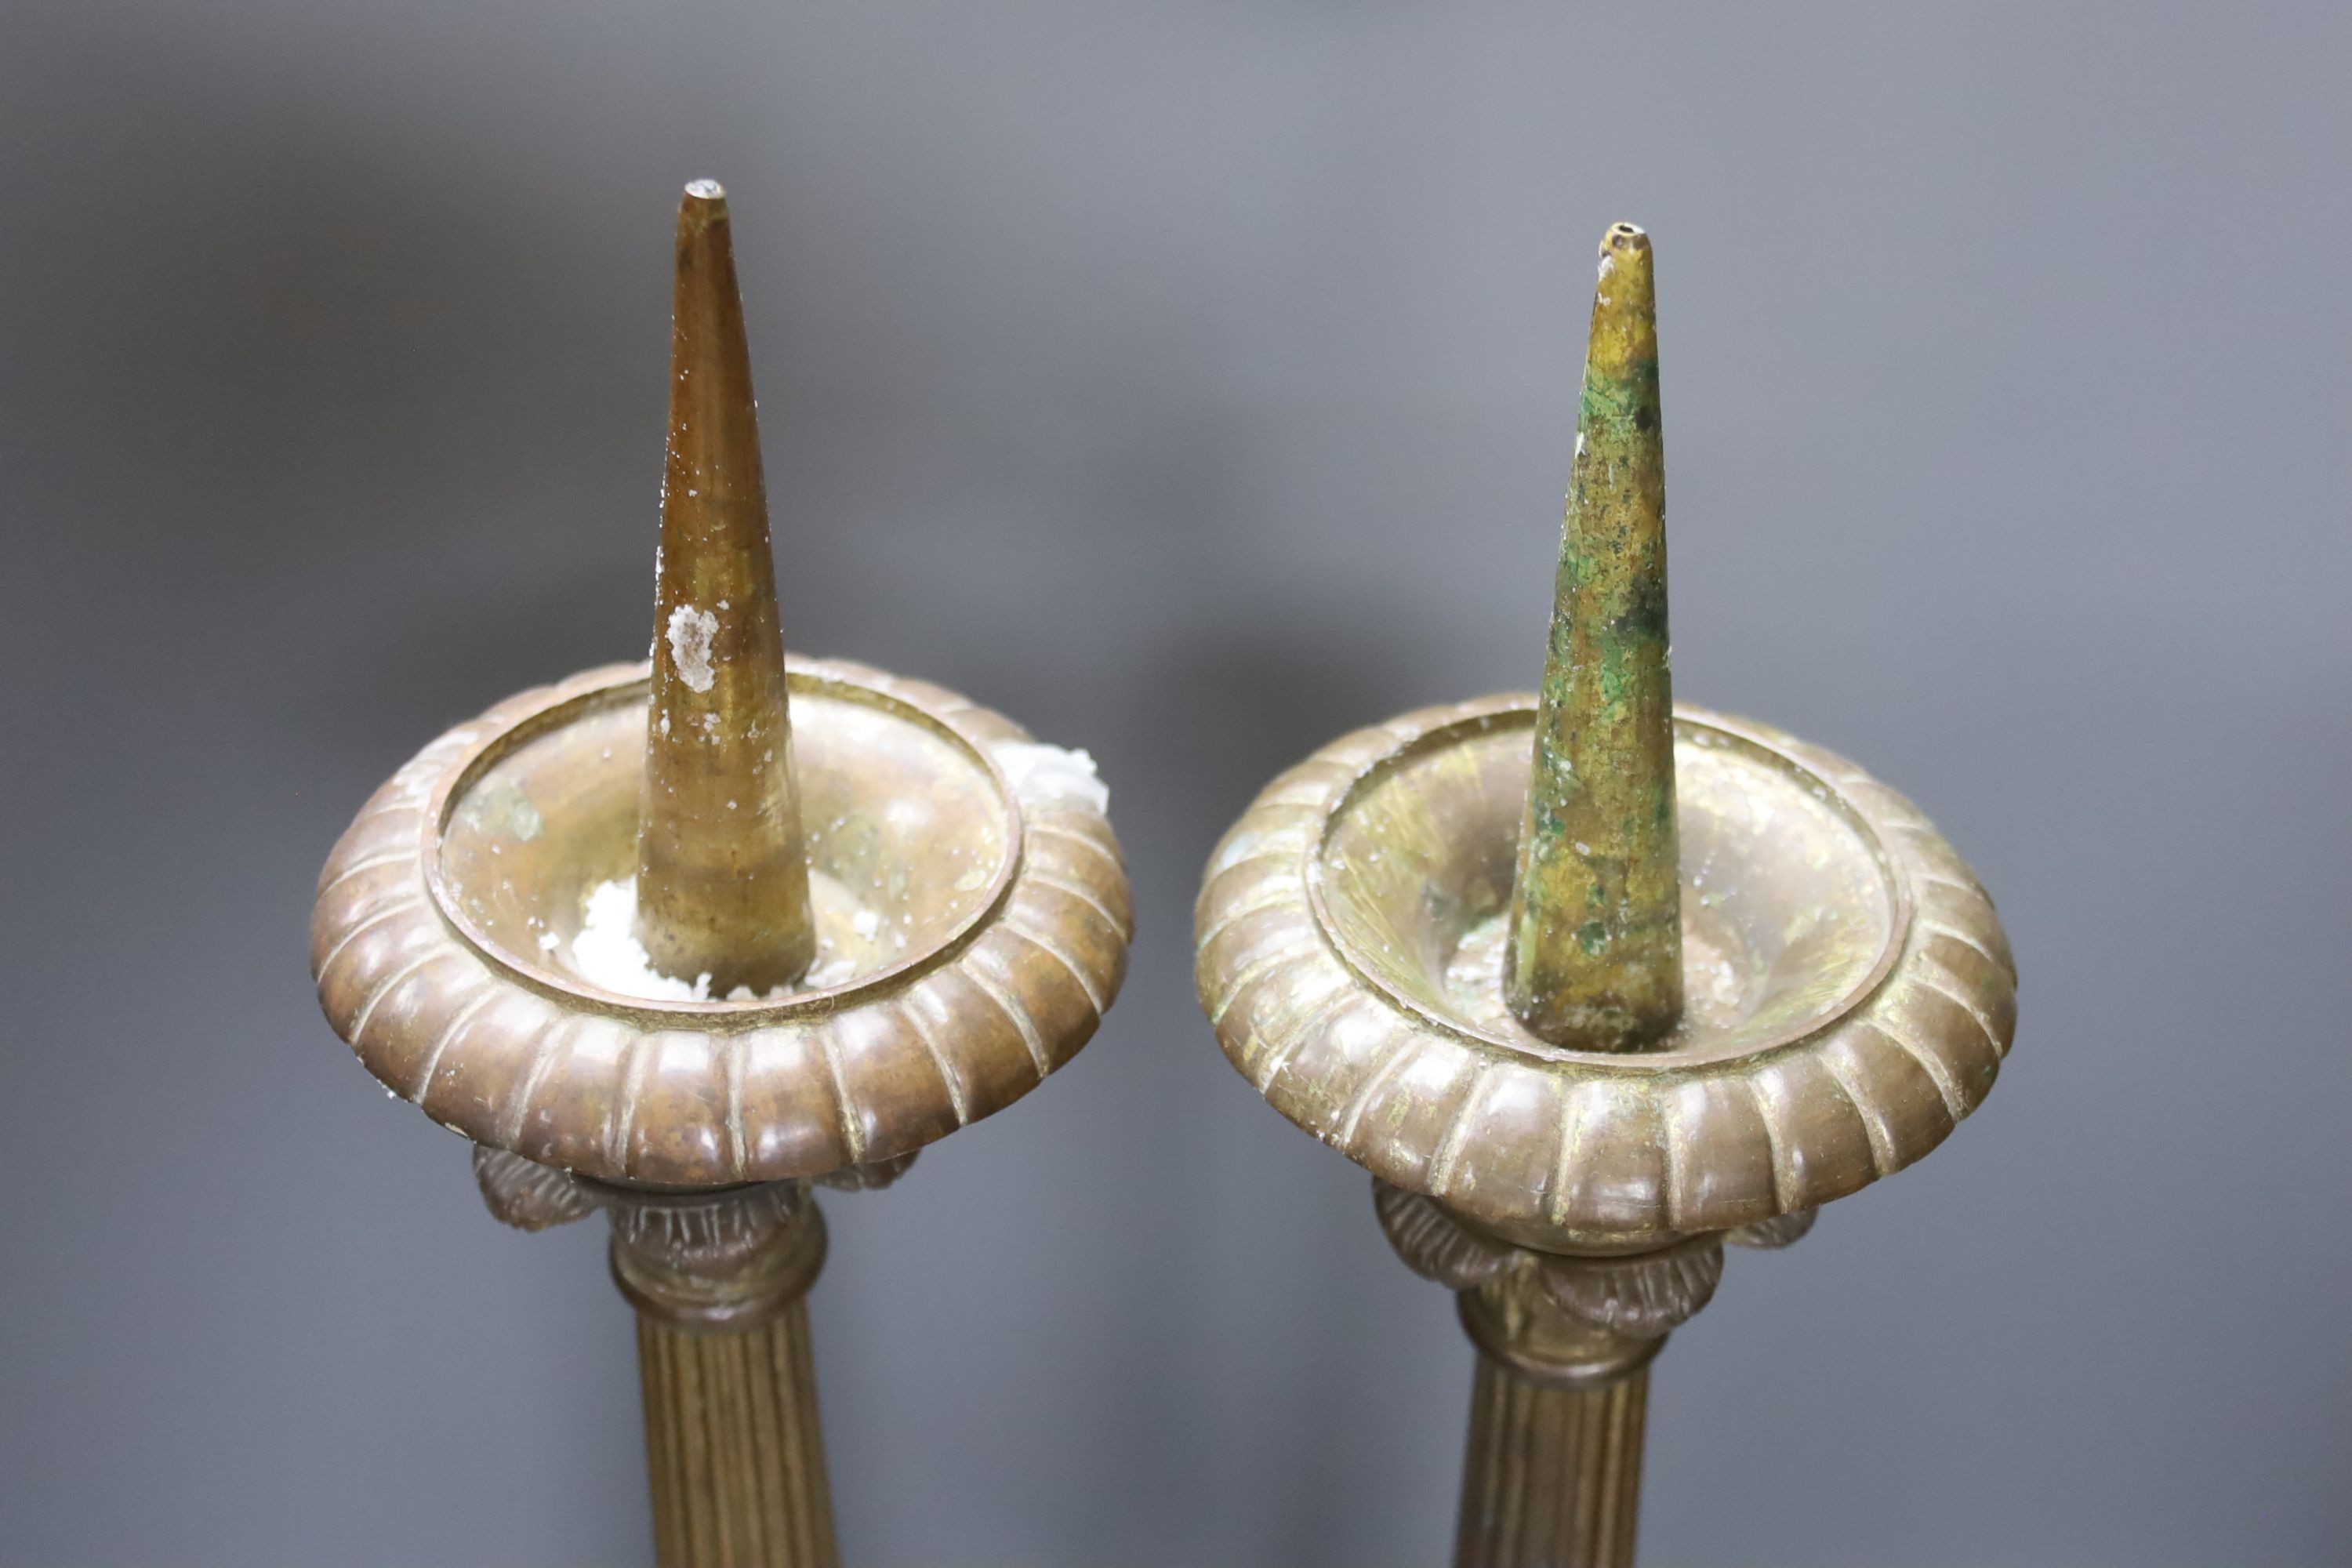 A pair of gilded brass pricket candlesticks 61cm